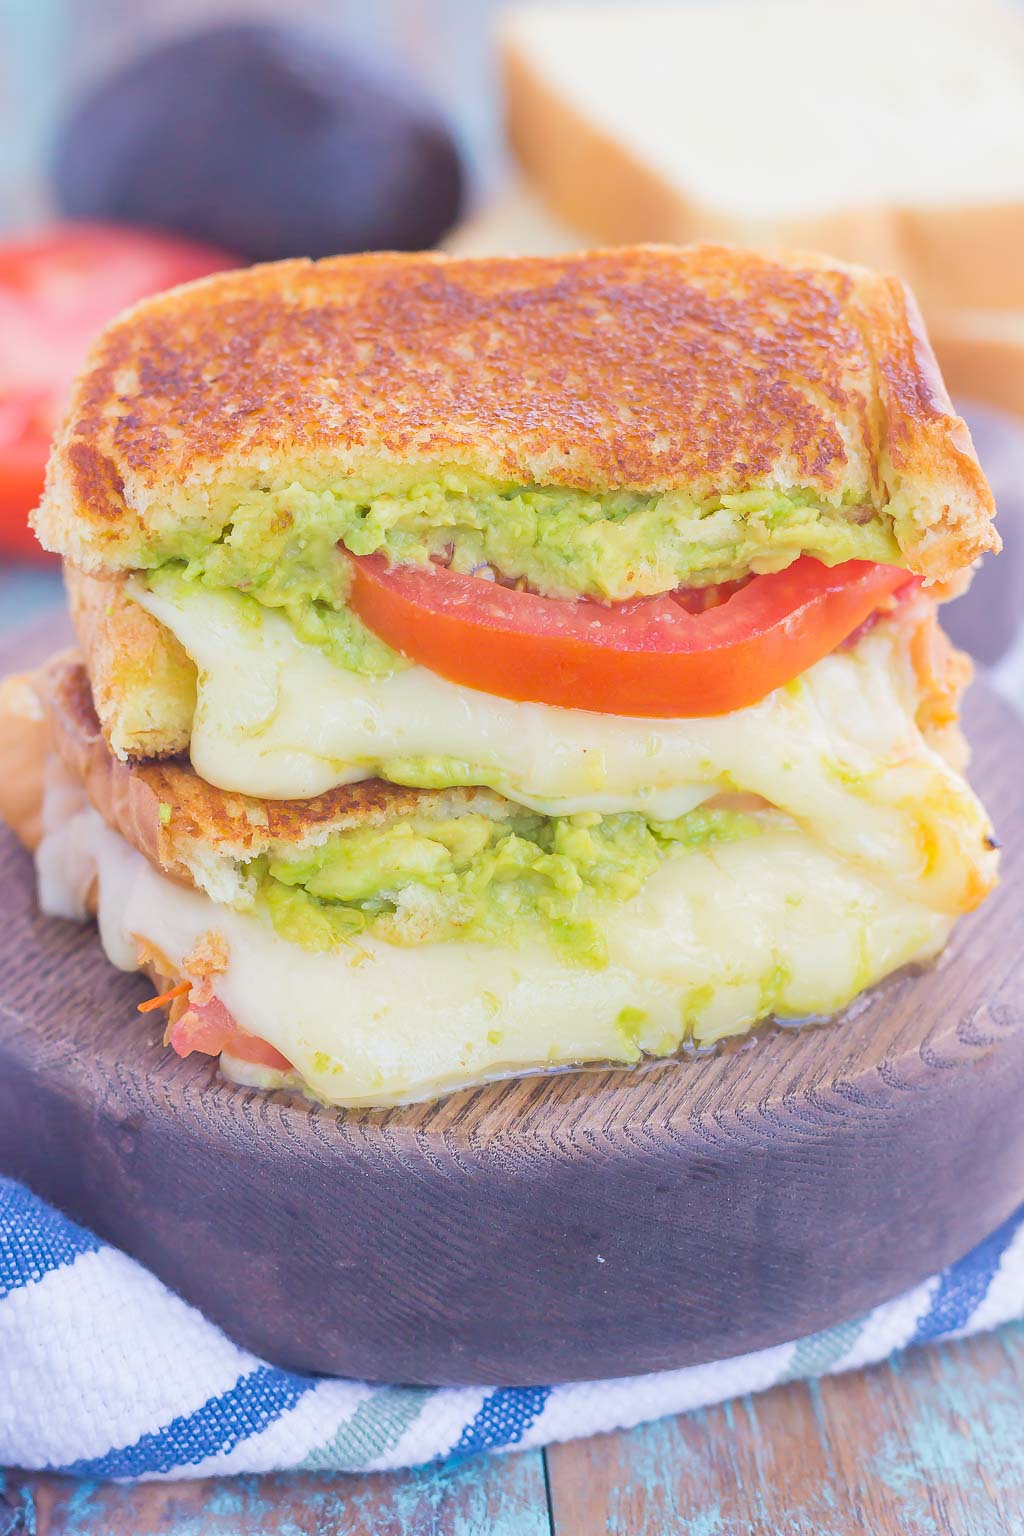 Tomato, Avocado and Mozzarella Grilled Cheese is filled with fresh tomato slices, smashed avocado and creamy mozzarella cheese. Grilled until golden on the outside and melty on the inside, this sandwich is perfect to pair with soup for an easy lunch or dinner!